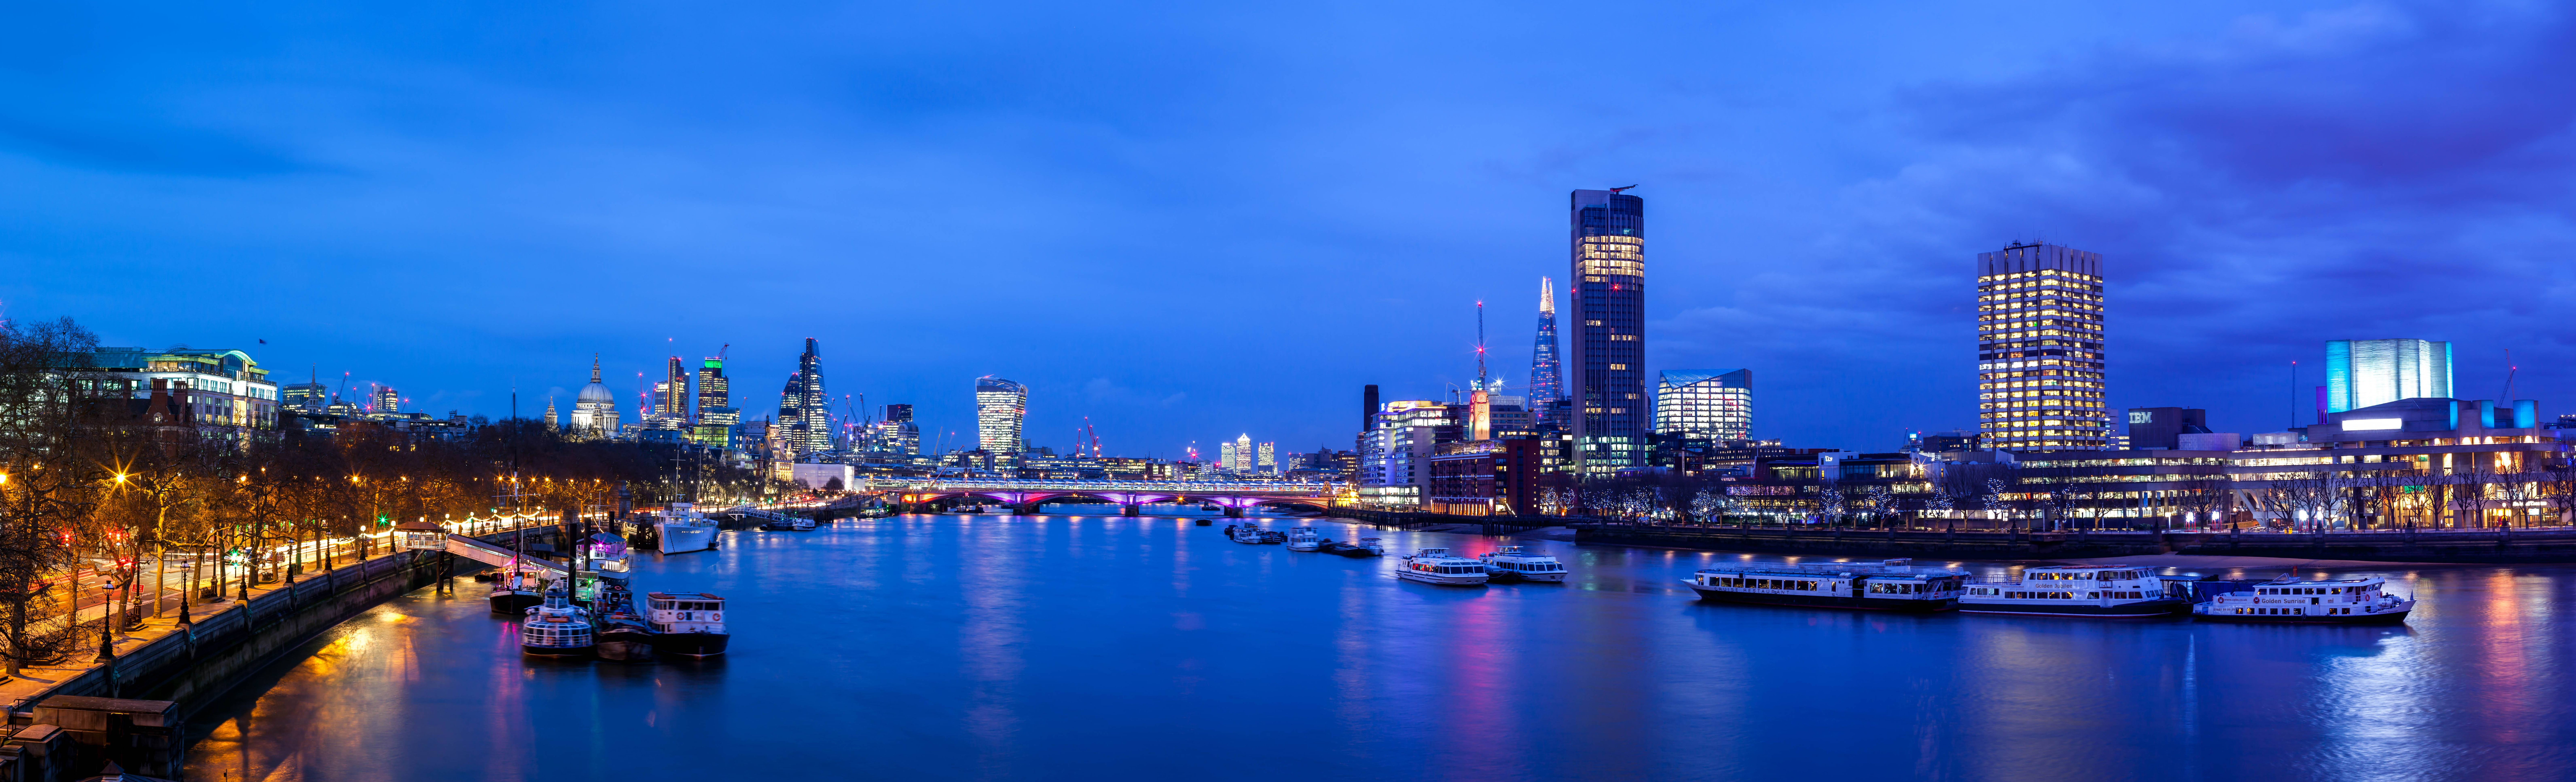 Wallpapers Great Britain London Thames River on the desktop